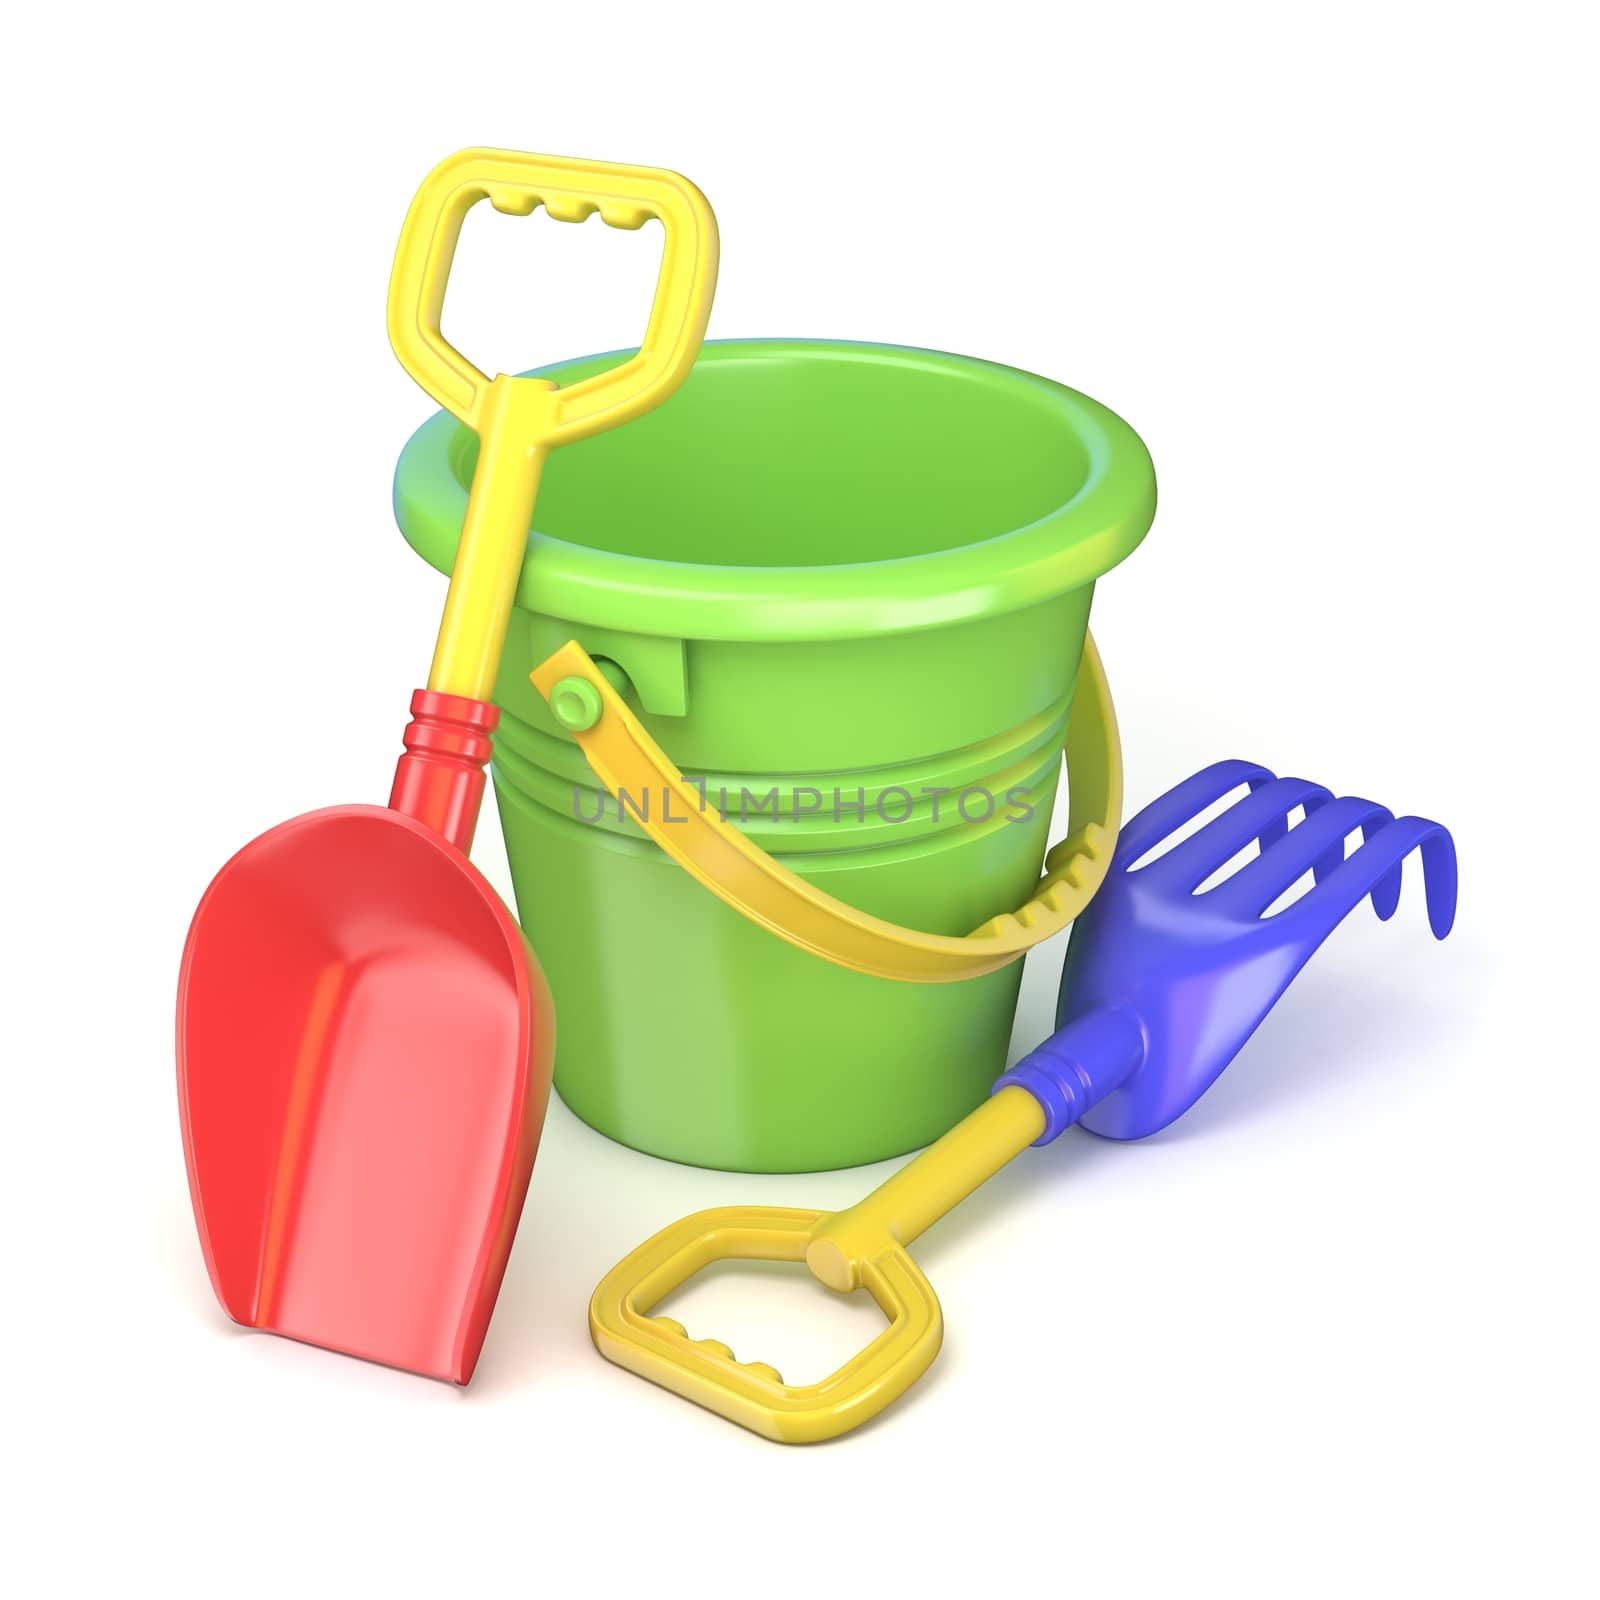 Toy bucket, rake and spade. 3D render illustration isolated on white background